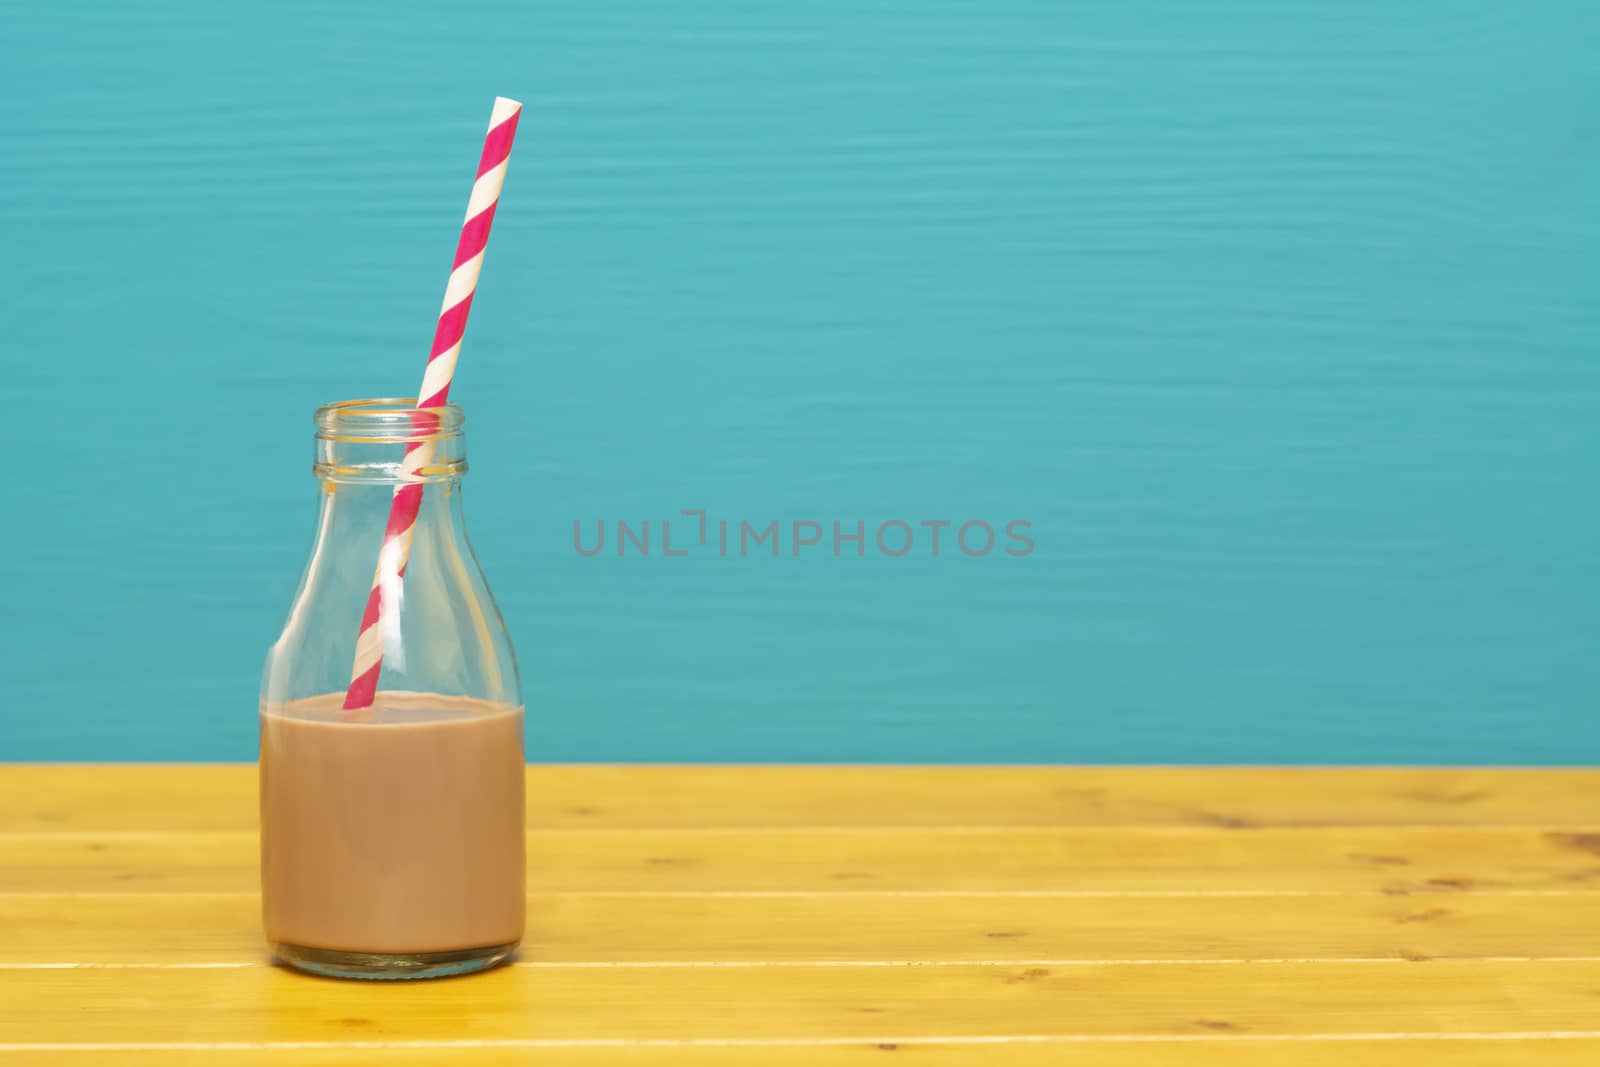 One-third pint glass milk bottle half full with chocolate milkshake with a retro paper straw, on a wooden table against a teal background